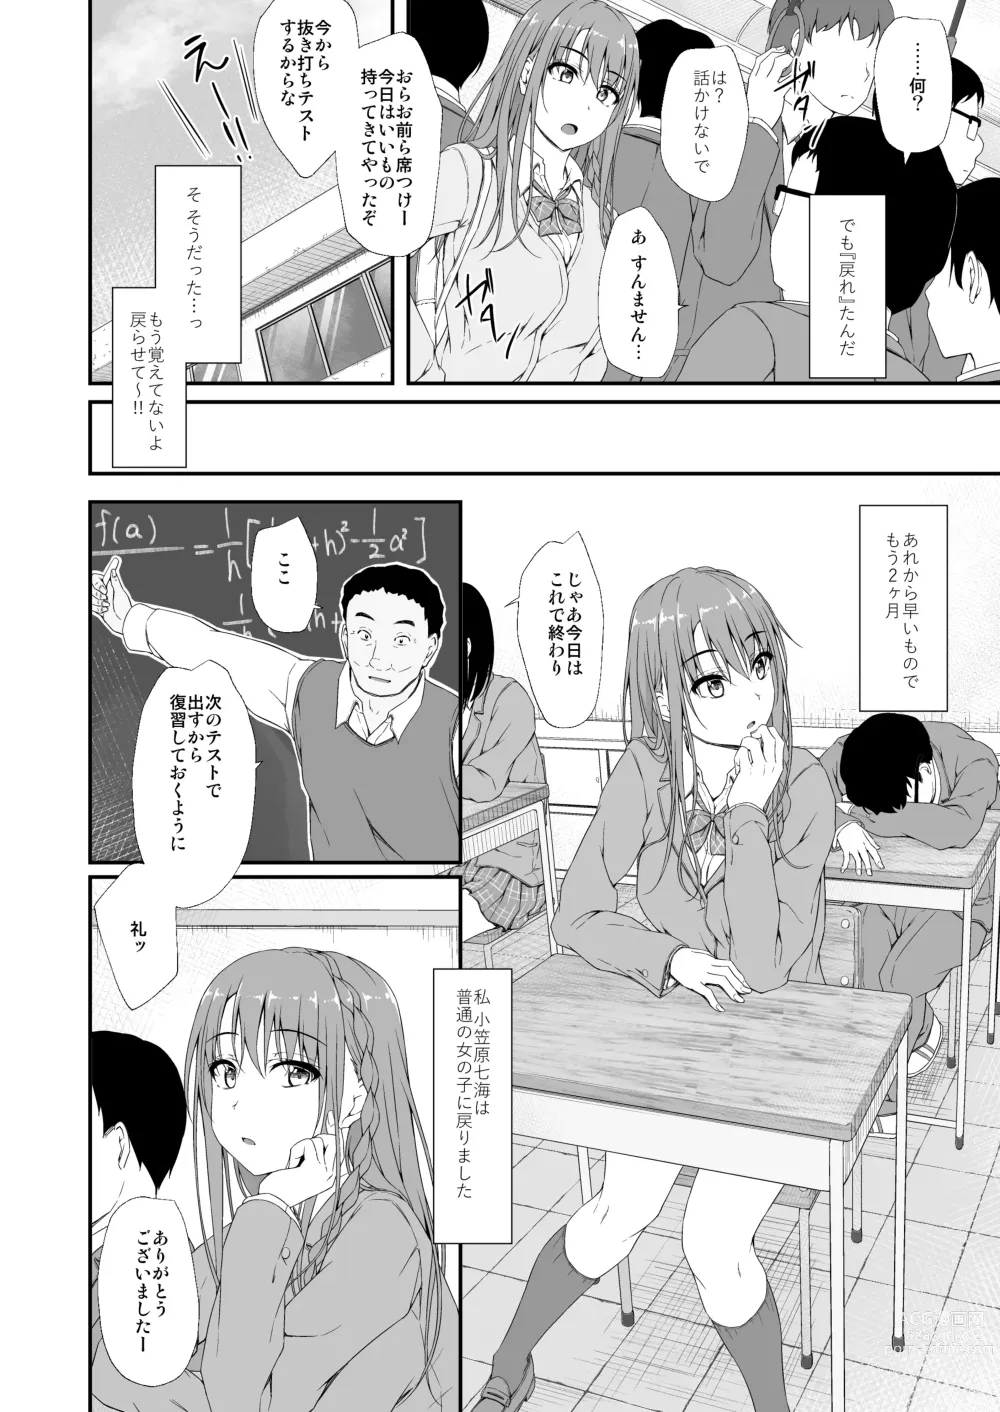 Page 21 of doujinshi Re:Temptation 6